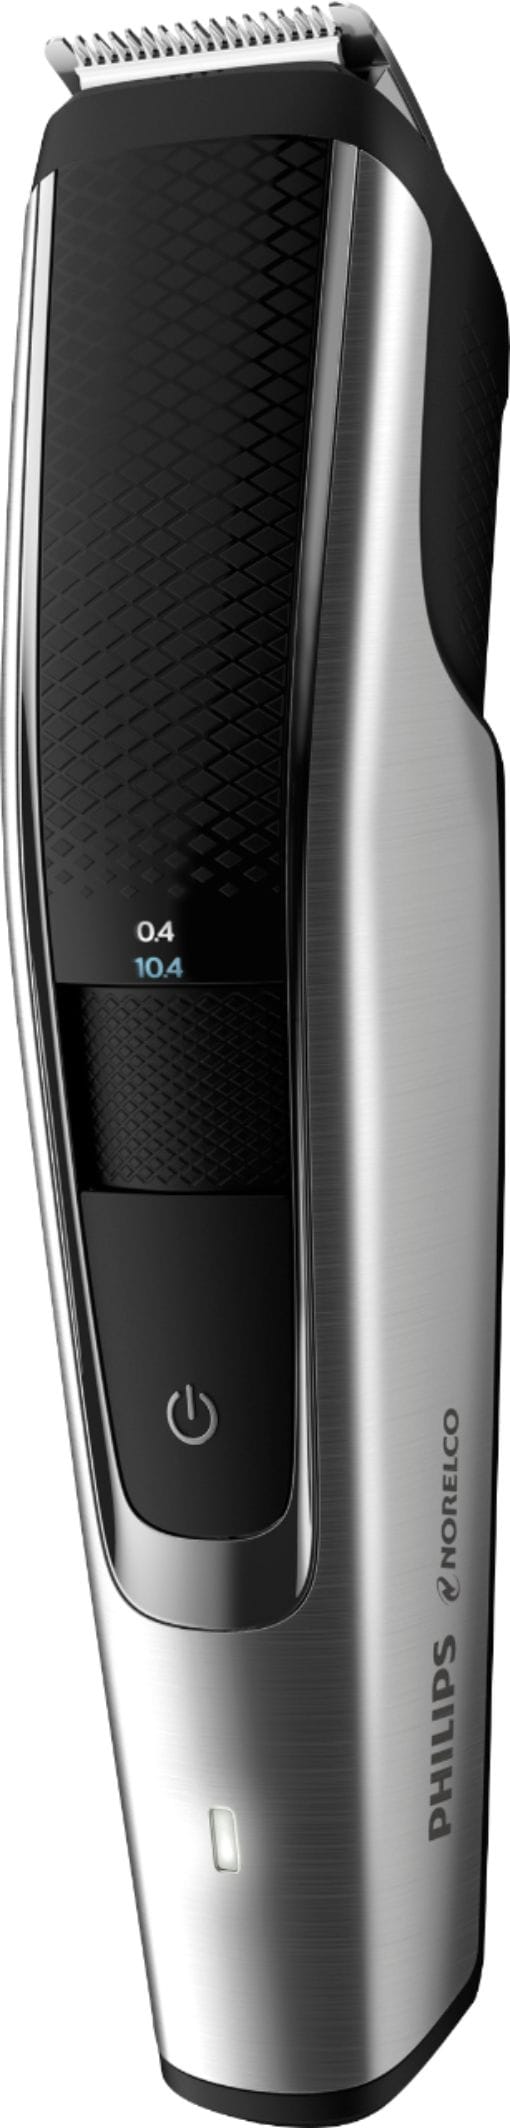 Philips Norelco - 5000 Series Hair Trimmer - Black/Silver_1